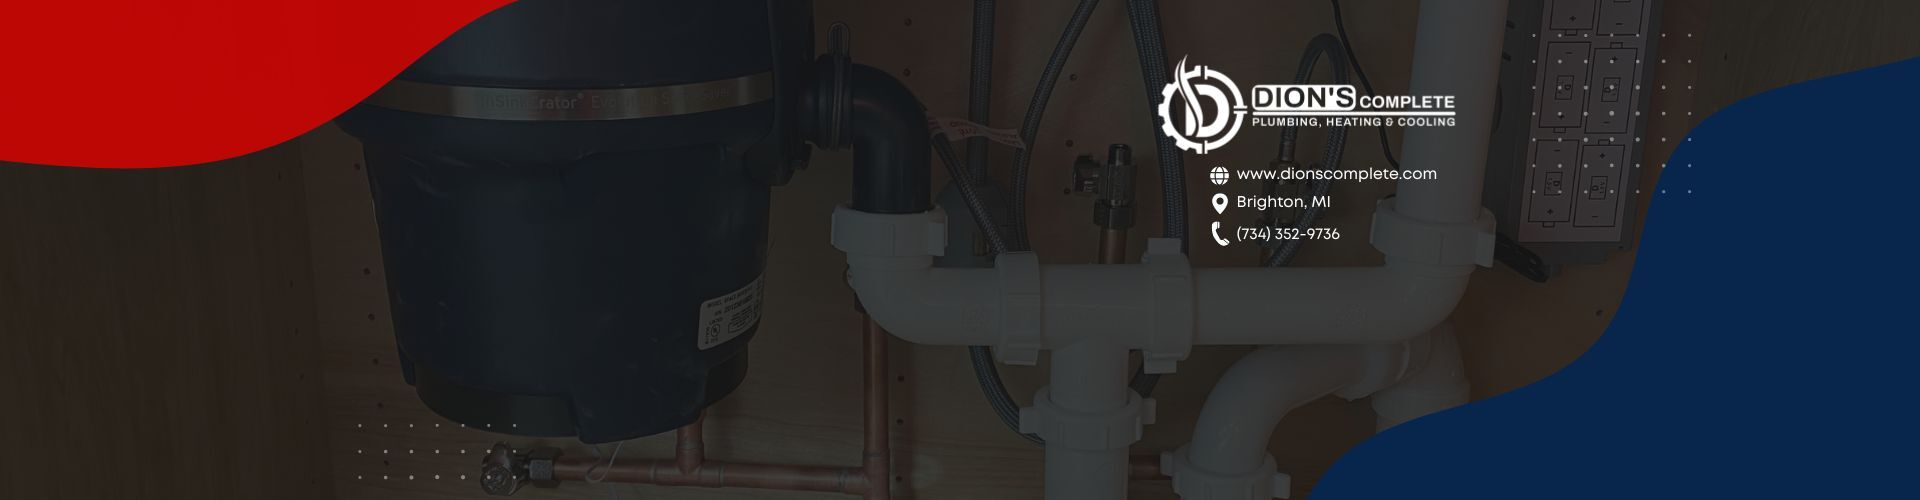 The DION’S COMPLETE Plumbing, Heating & Cooling Podcast